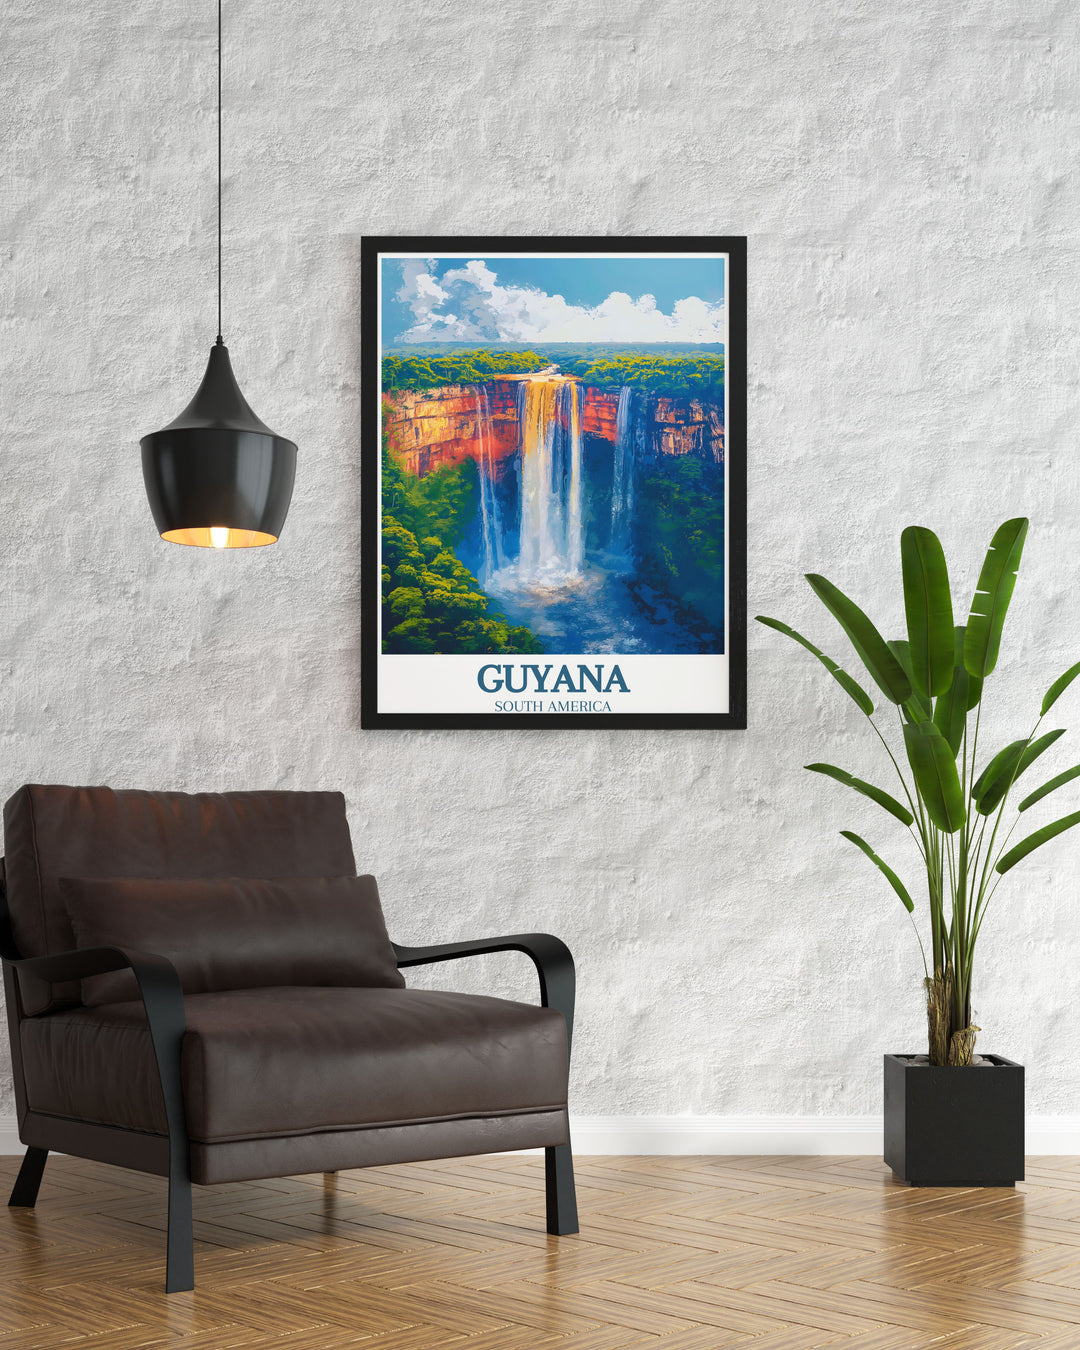 Highlighting the untouched landscapes and pristine rivers of Guyana, this travel poster offers a captivating view of the countrys natural beauty, ideal for those who appreciate scenic art.